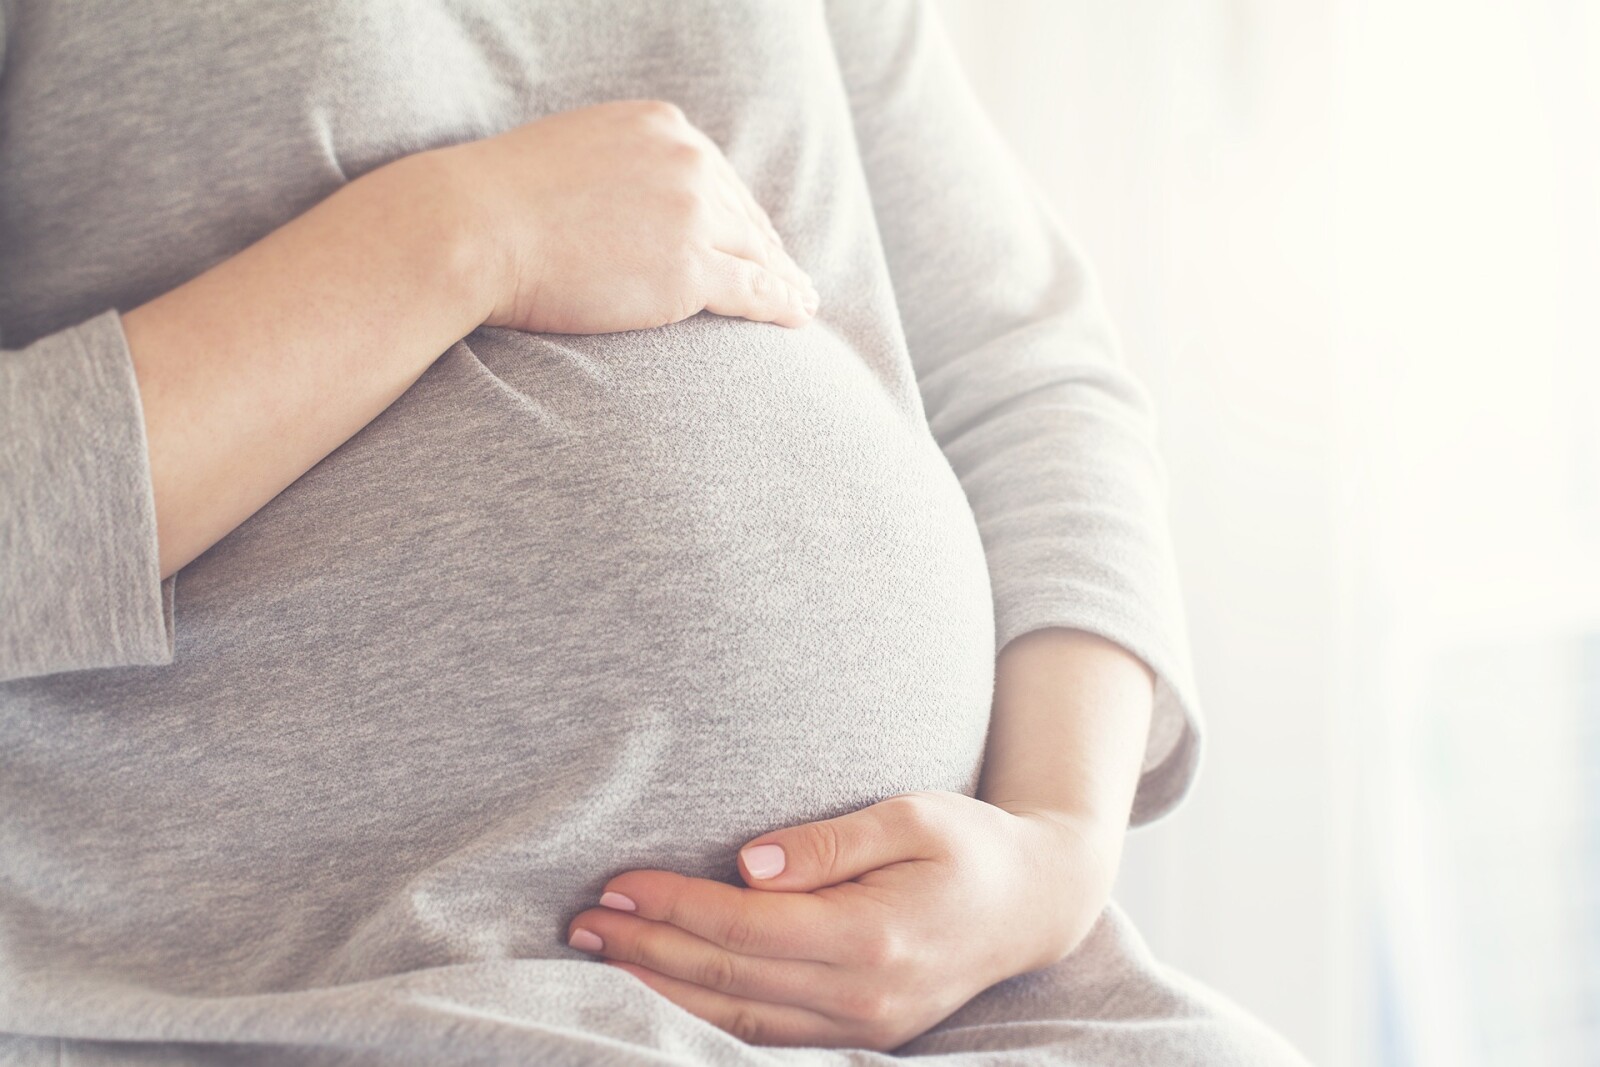 Finding A Solution For My Pregnancy Heartburn